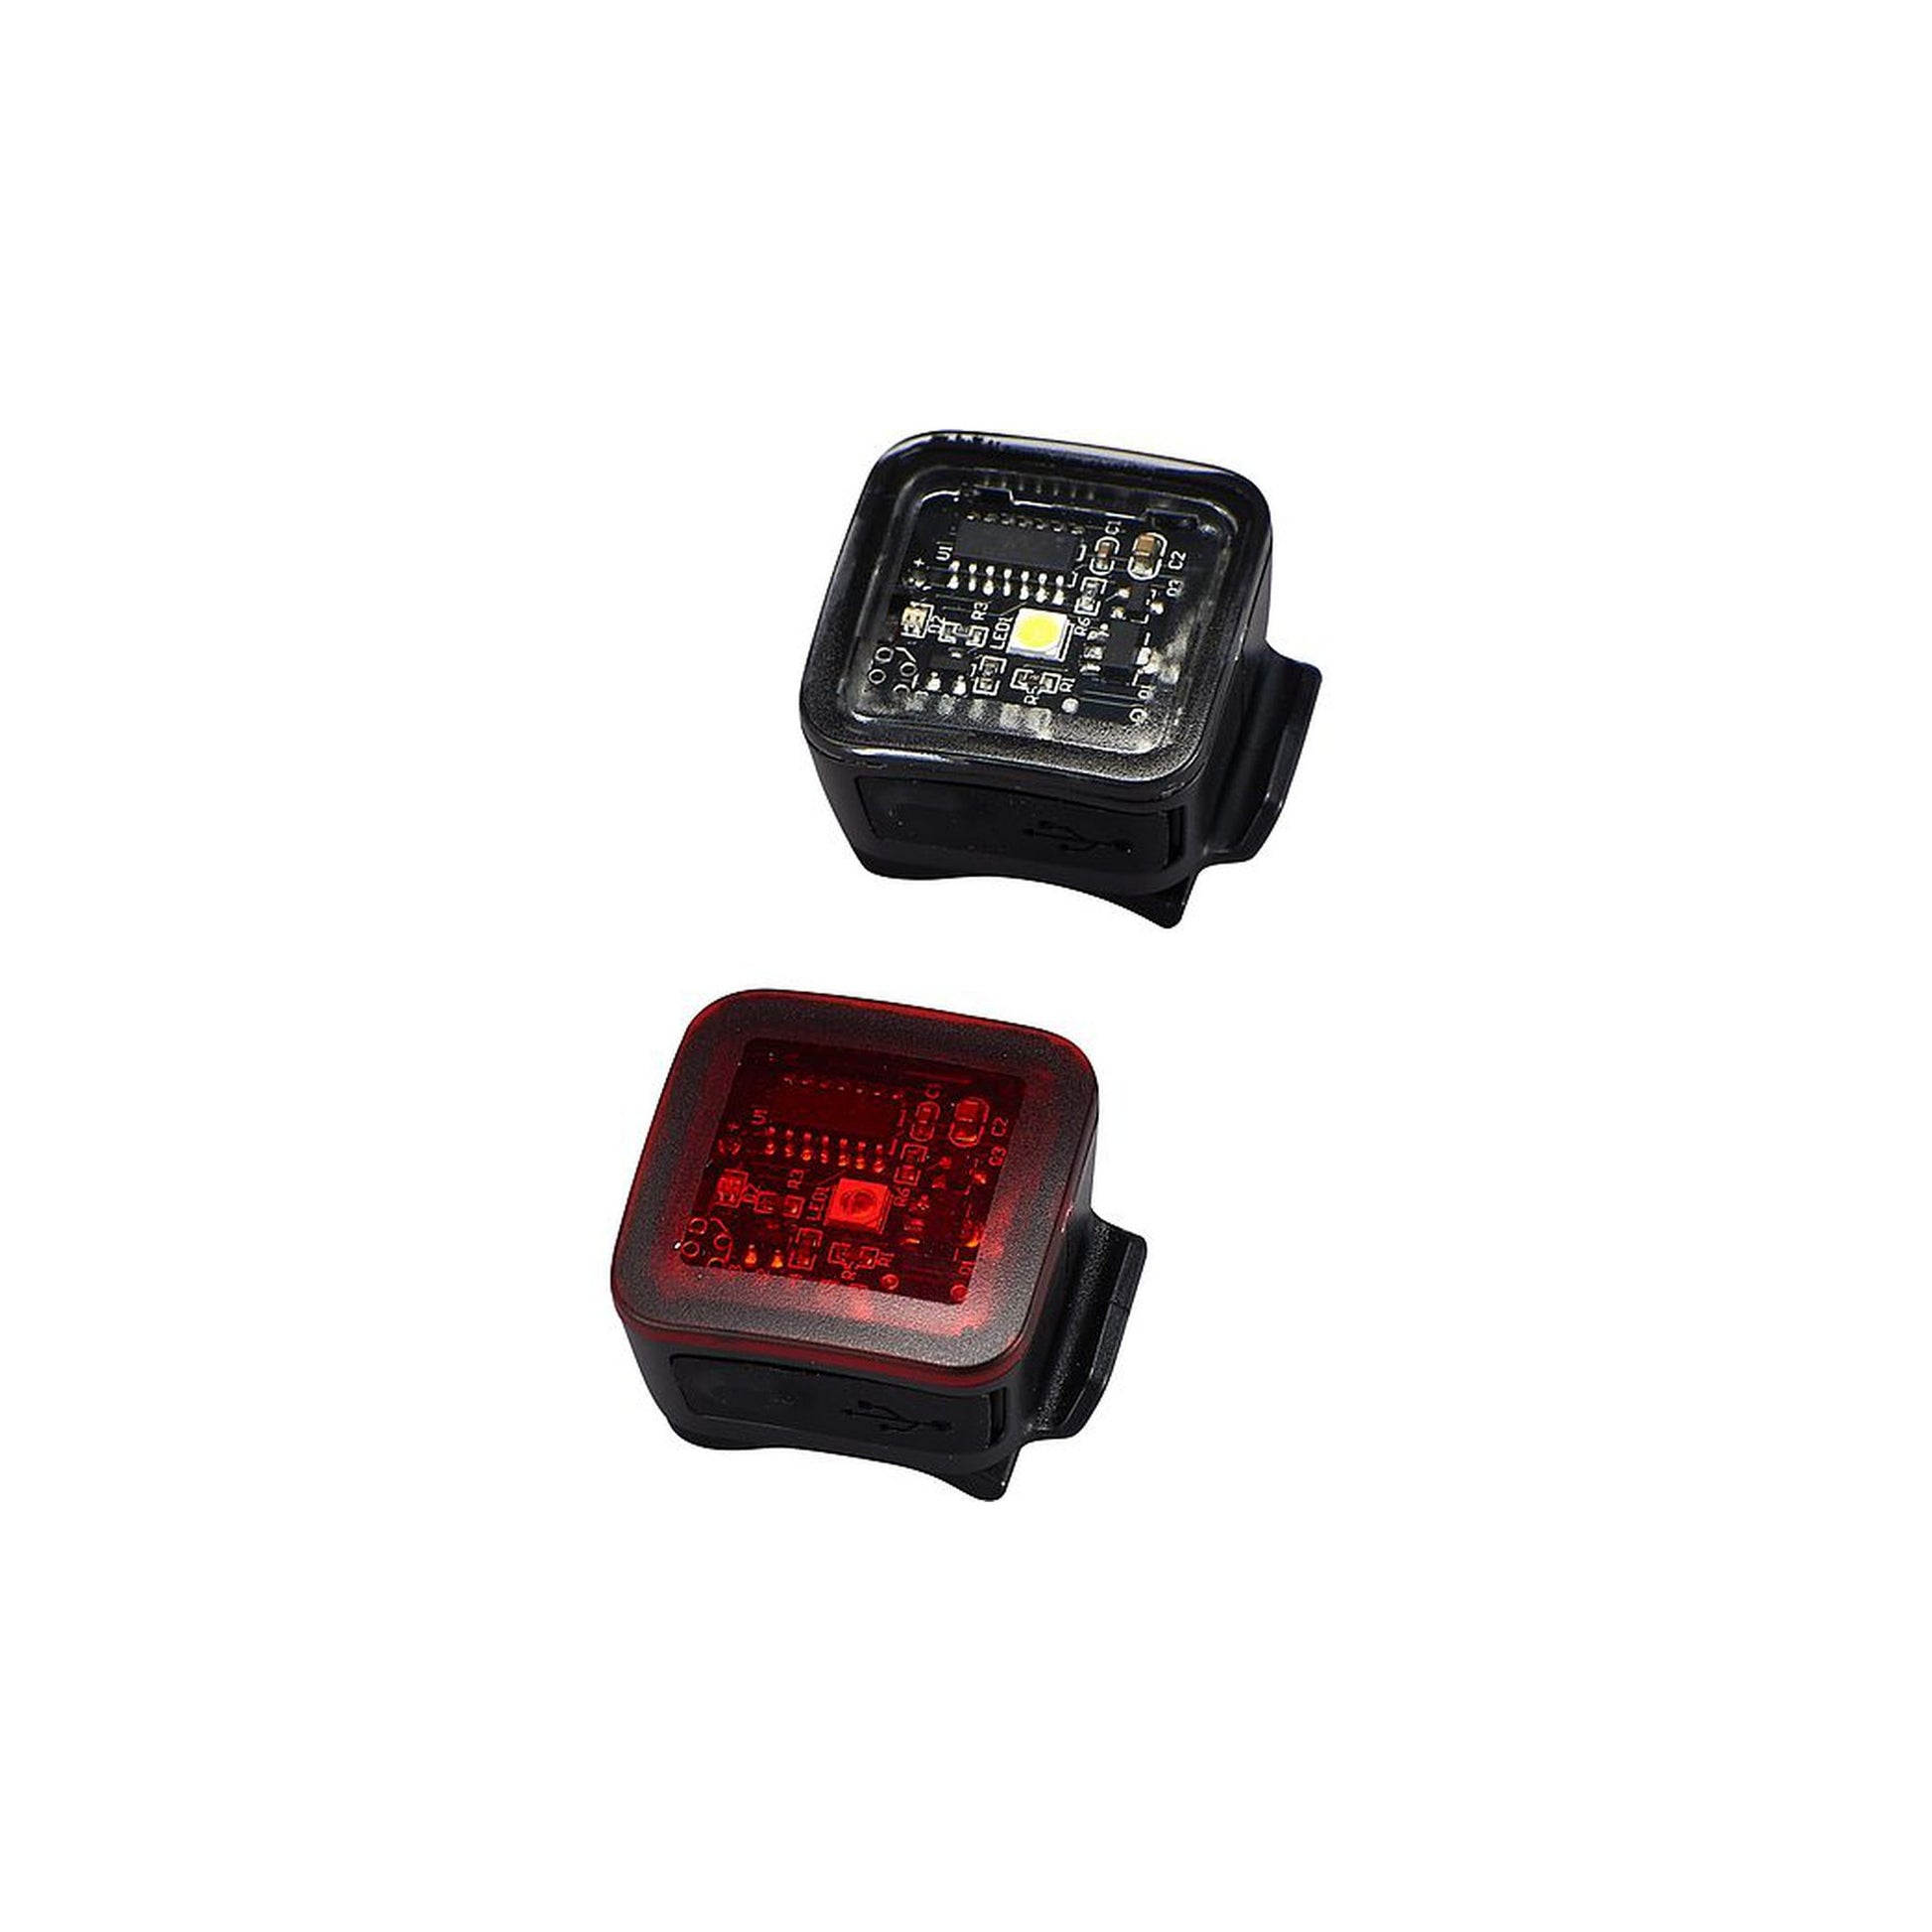 Flash Headlight/Taillight Combo | completecyclist - With the Flash Headlight/Taillight Combo, you're equipped with everything you need to be seen. It features up to 70 lumens in the front and 20 lumens in the